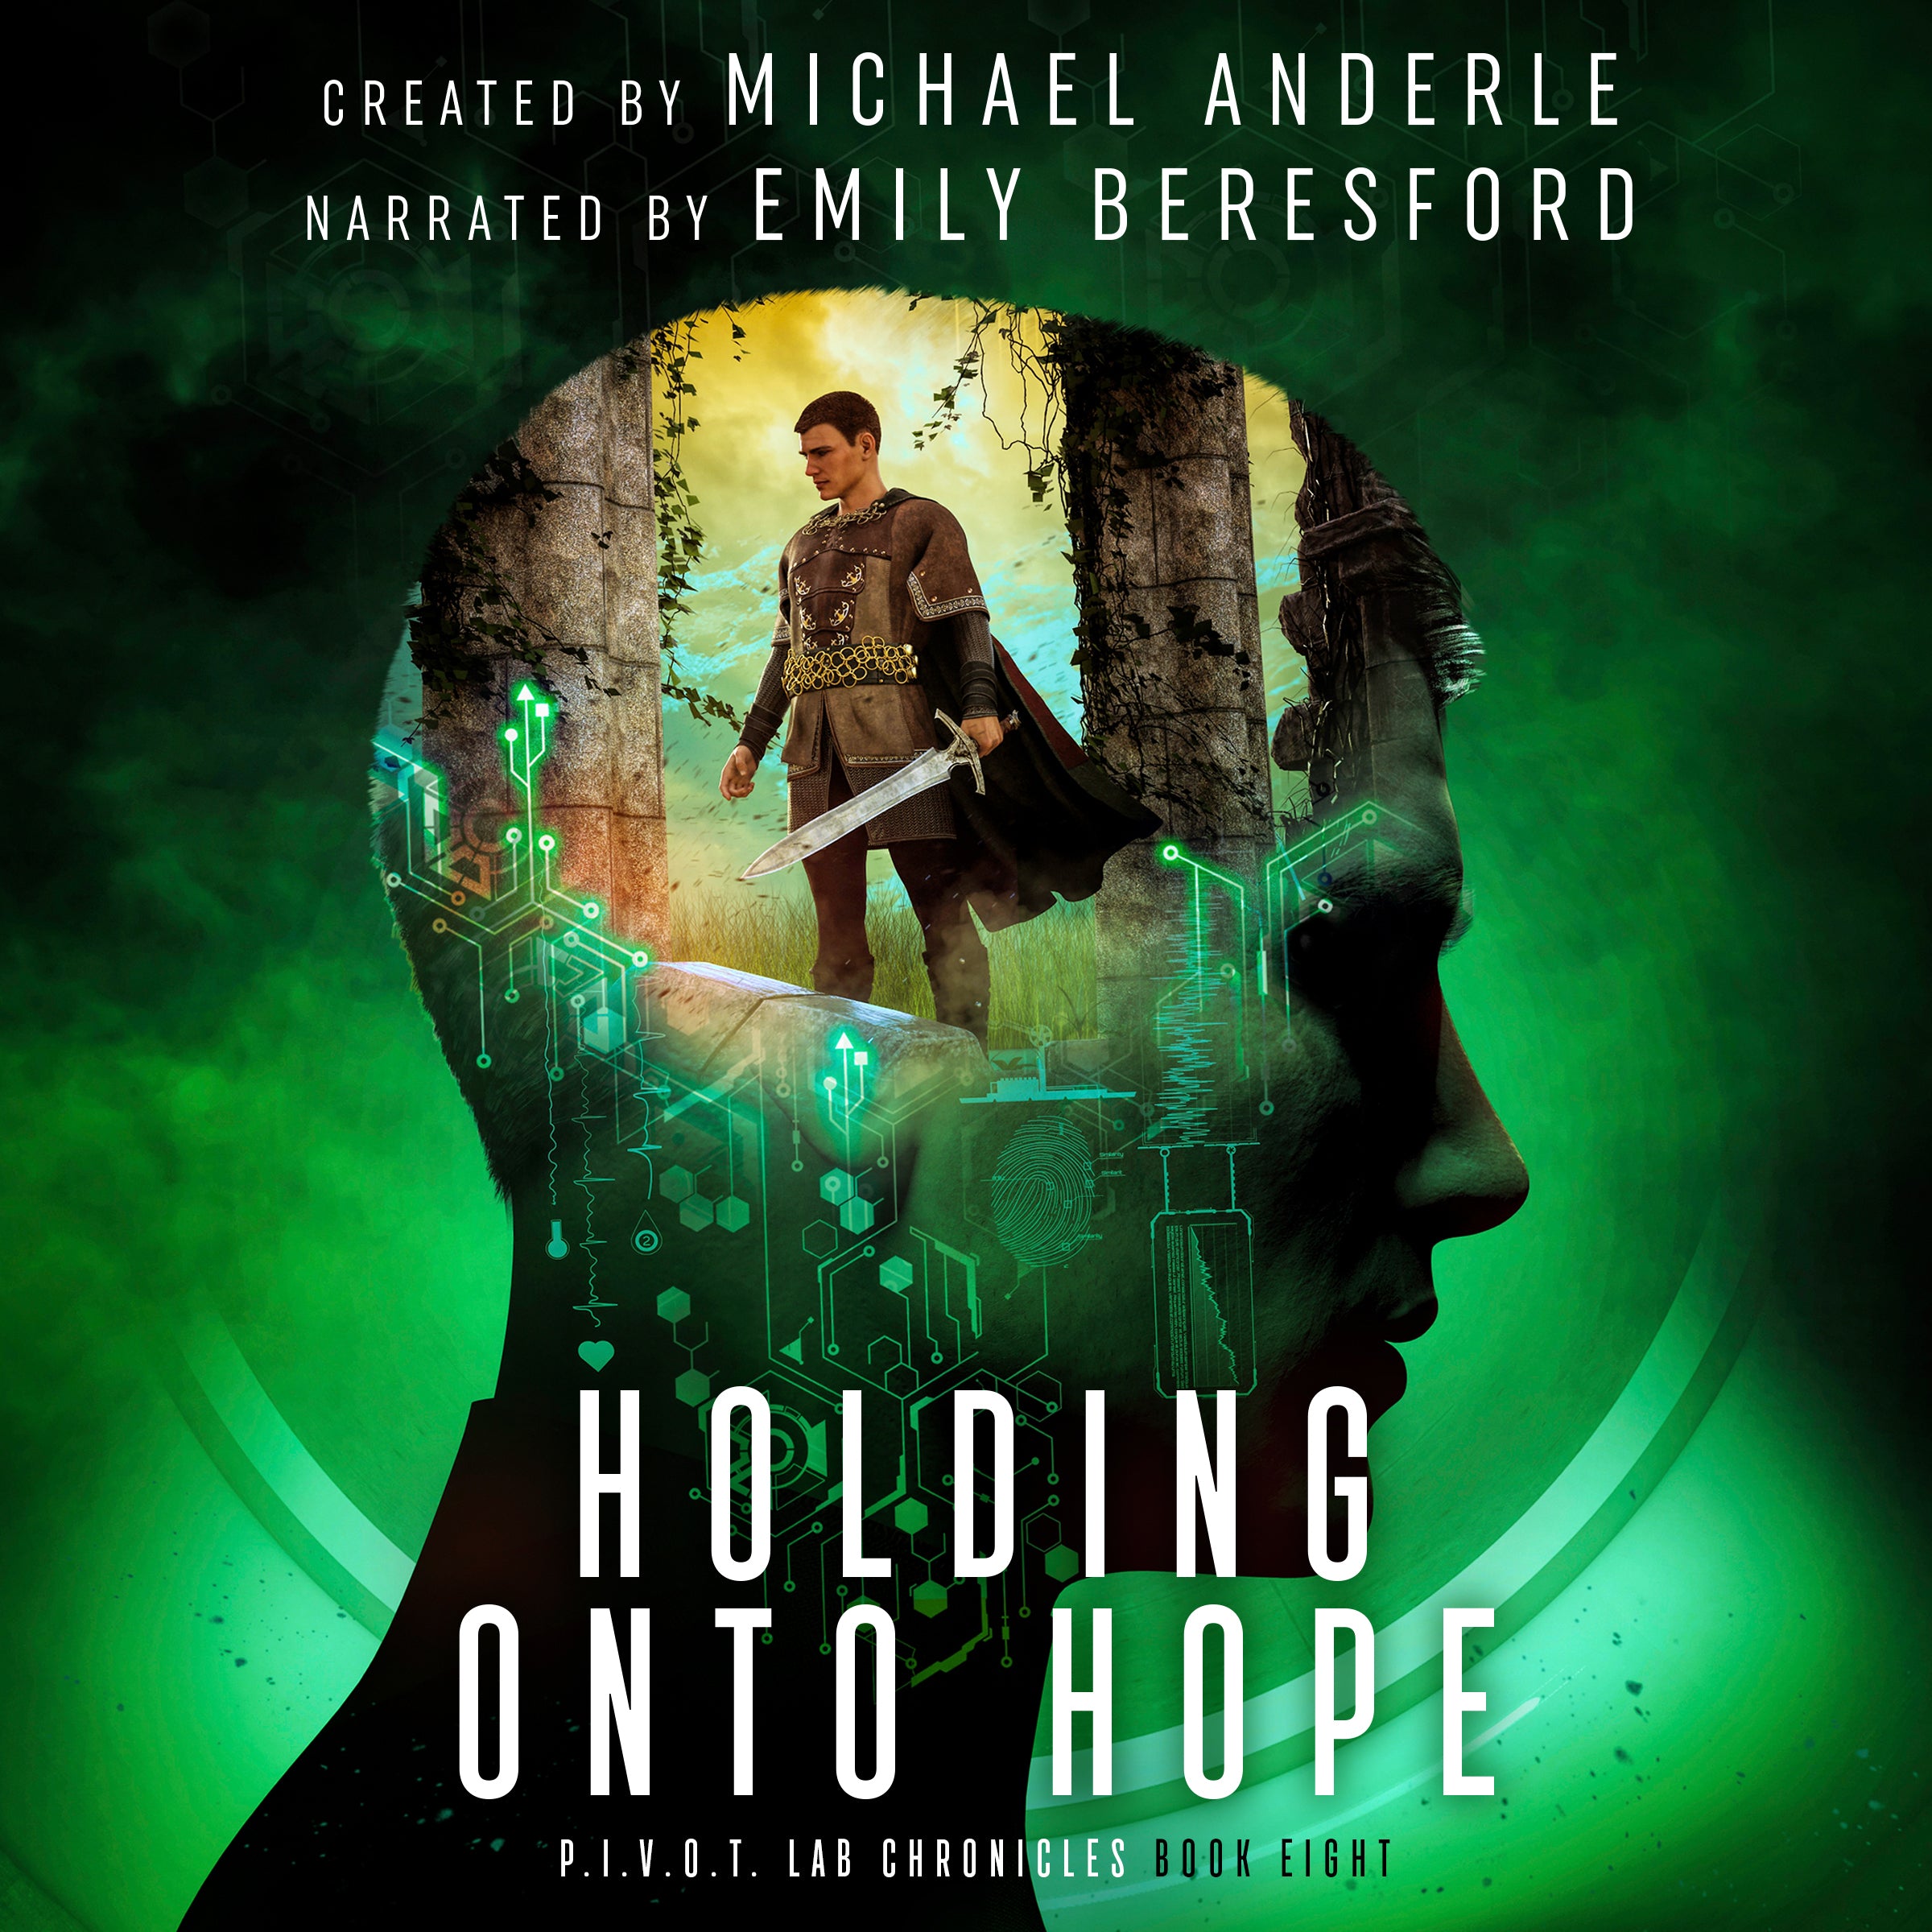 Book 8: Holding Onto Hope Audiobook